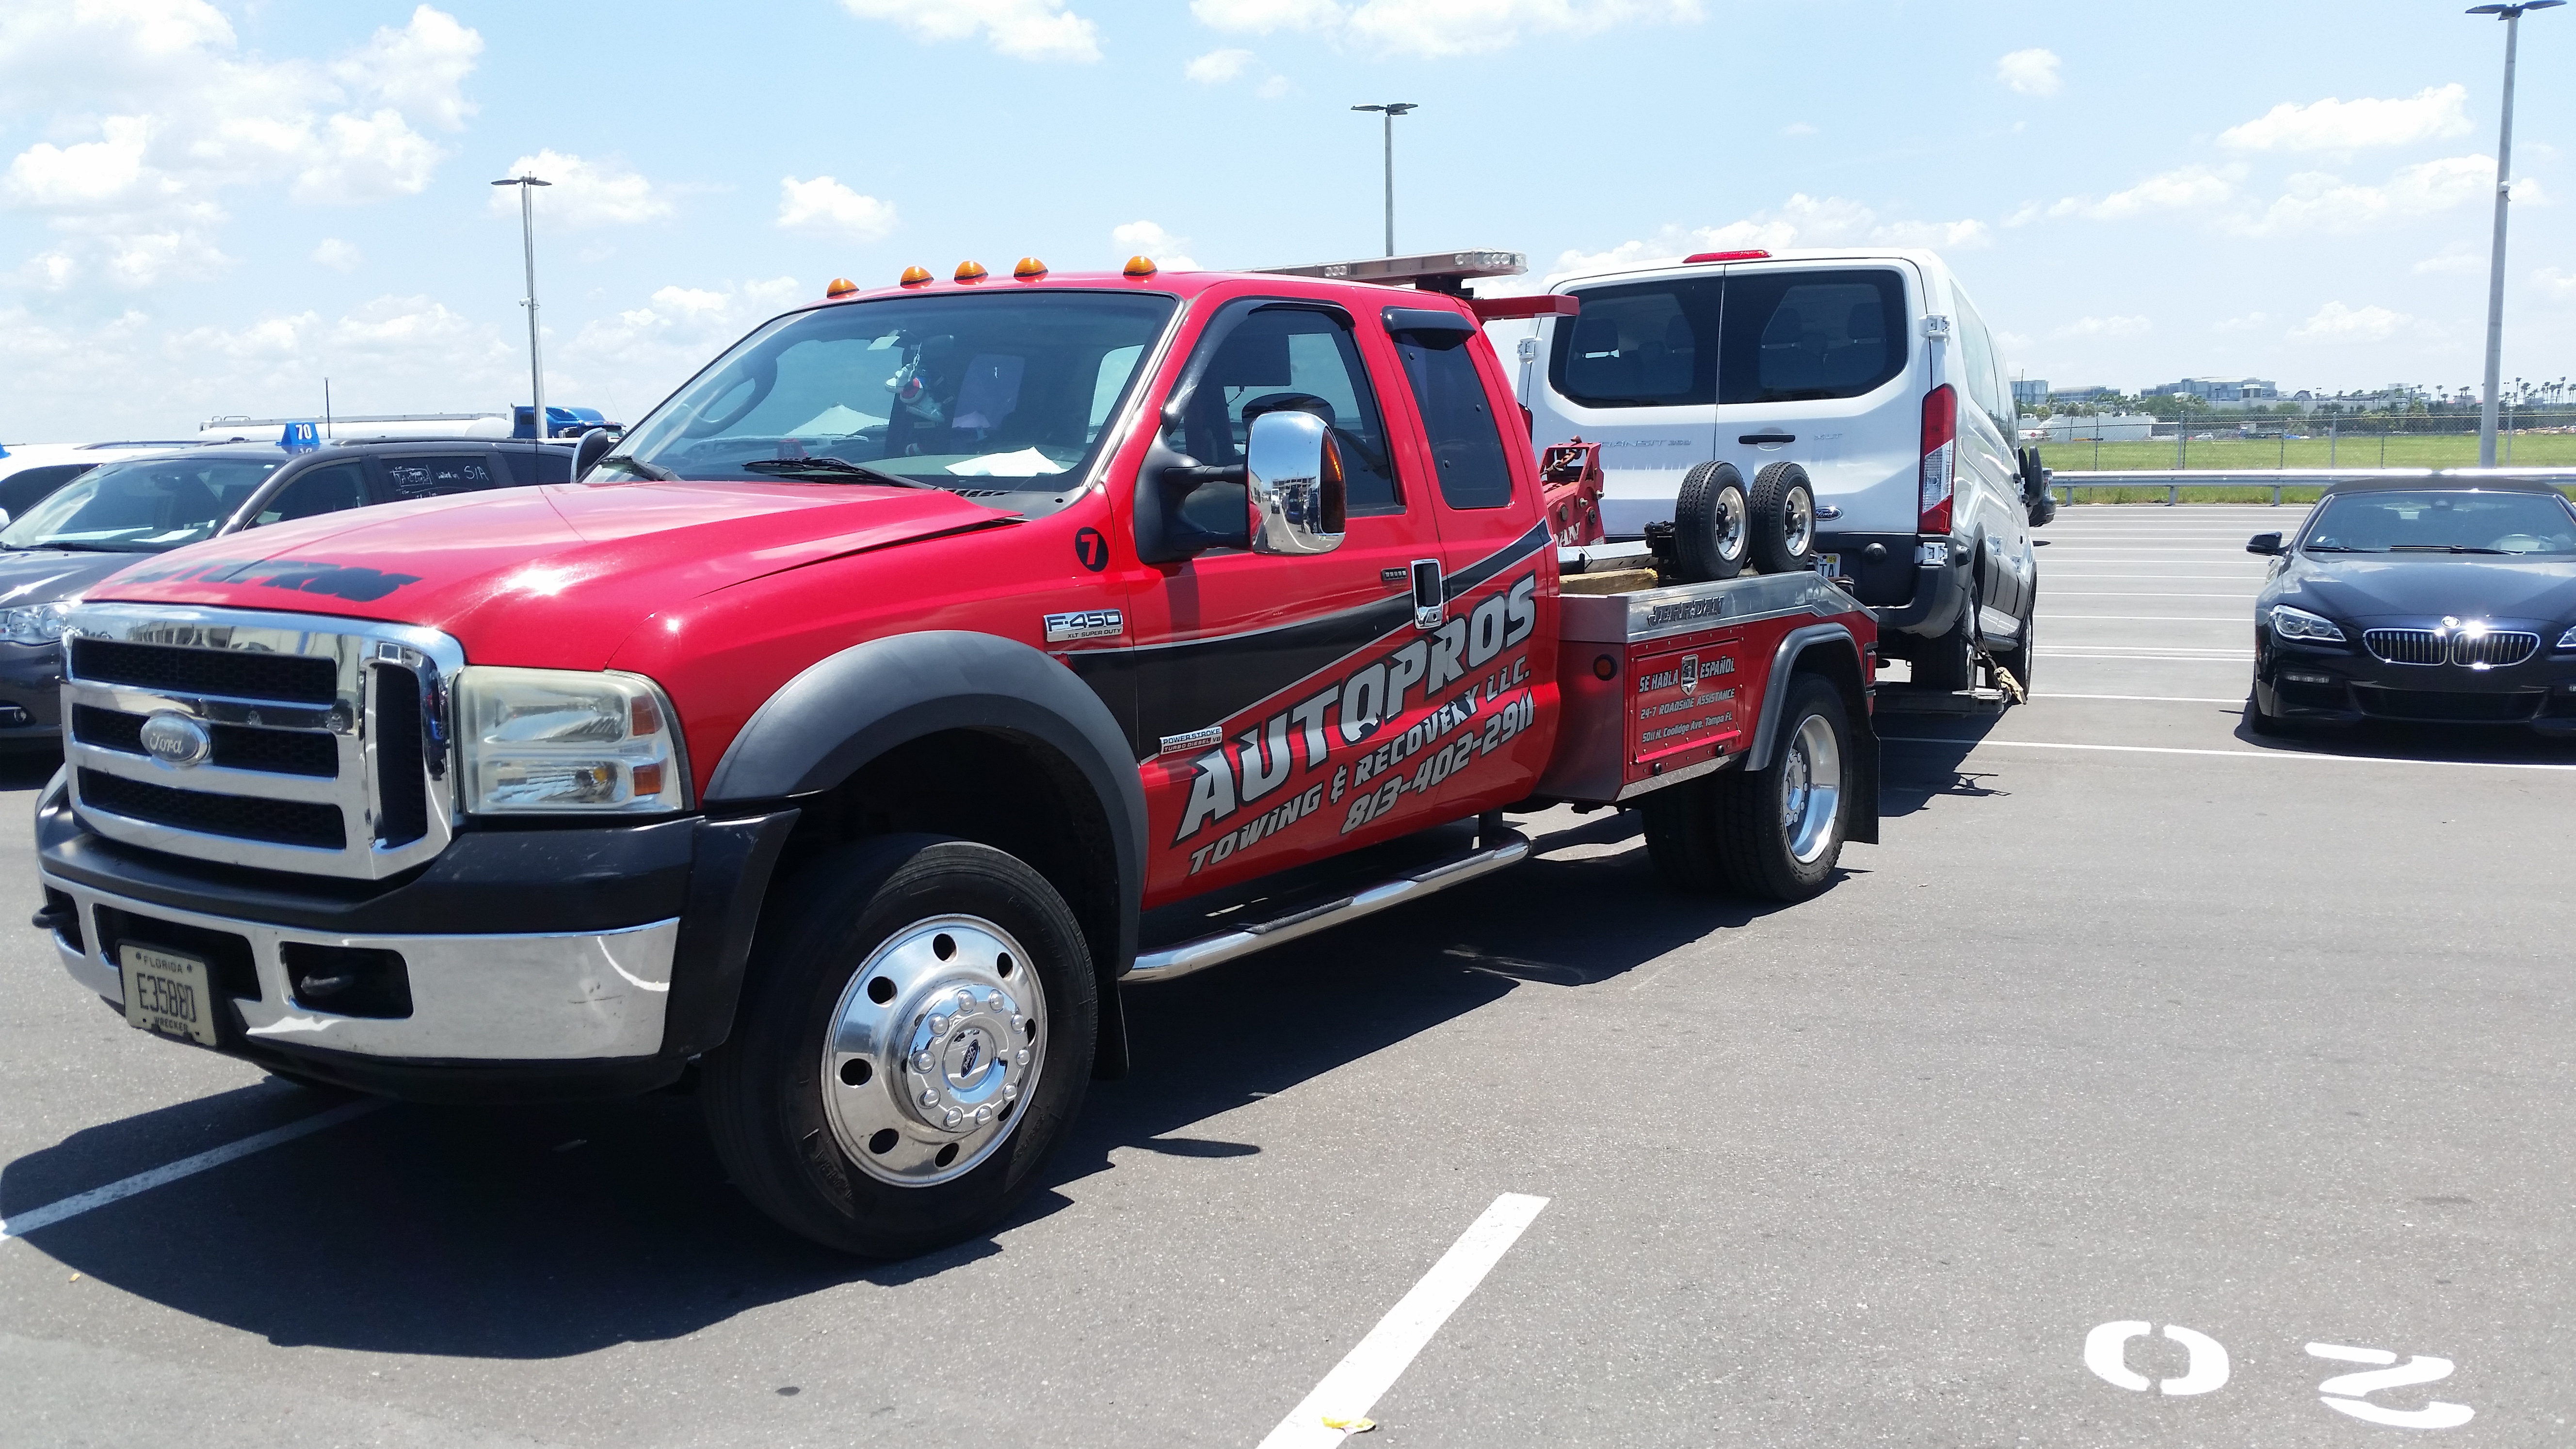 Autopros Towing & Recovery LLC delivers the safest, most reliable towing services in Tampa, FL. We are quickly building a reputation as the area’s most professional and courteous towing company. With more than 20 years of experience behind us, you can rest assured that your vehicle will be in good shape thanks to our towing and roadside assistance services.